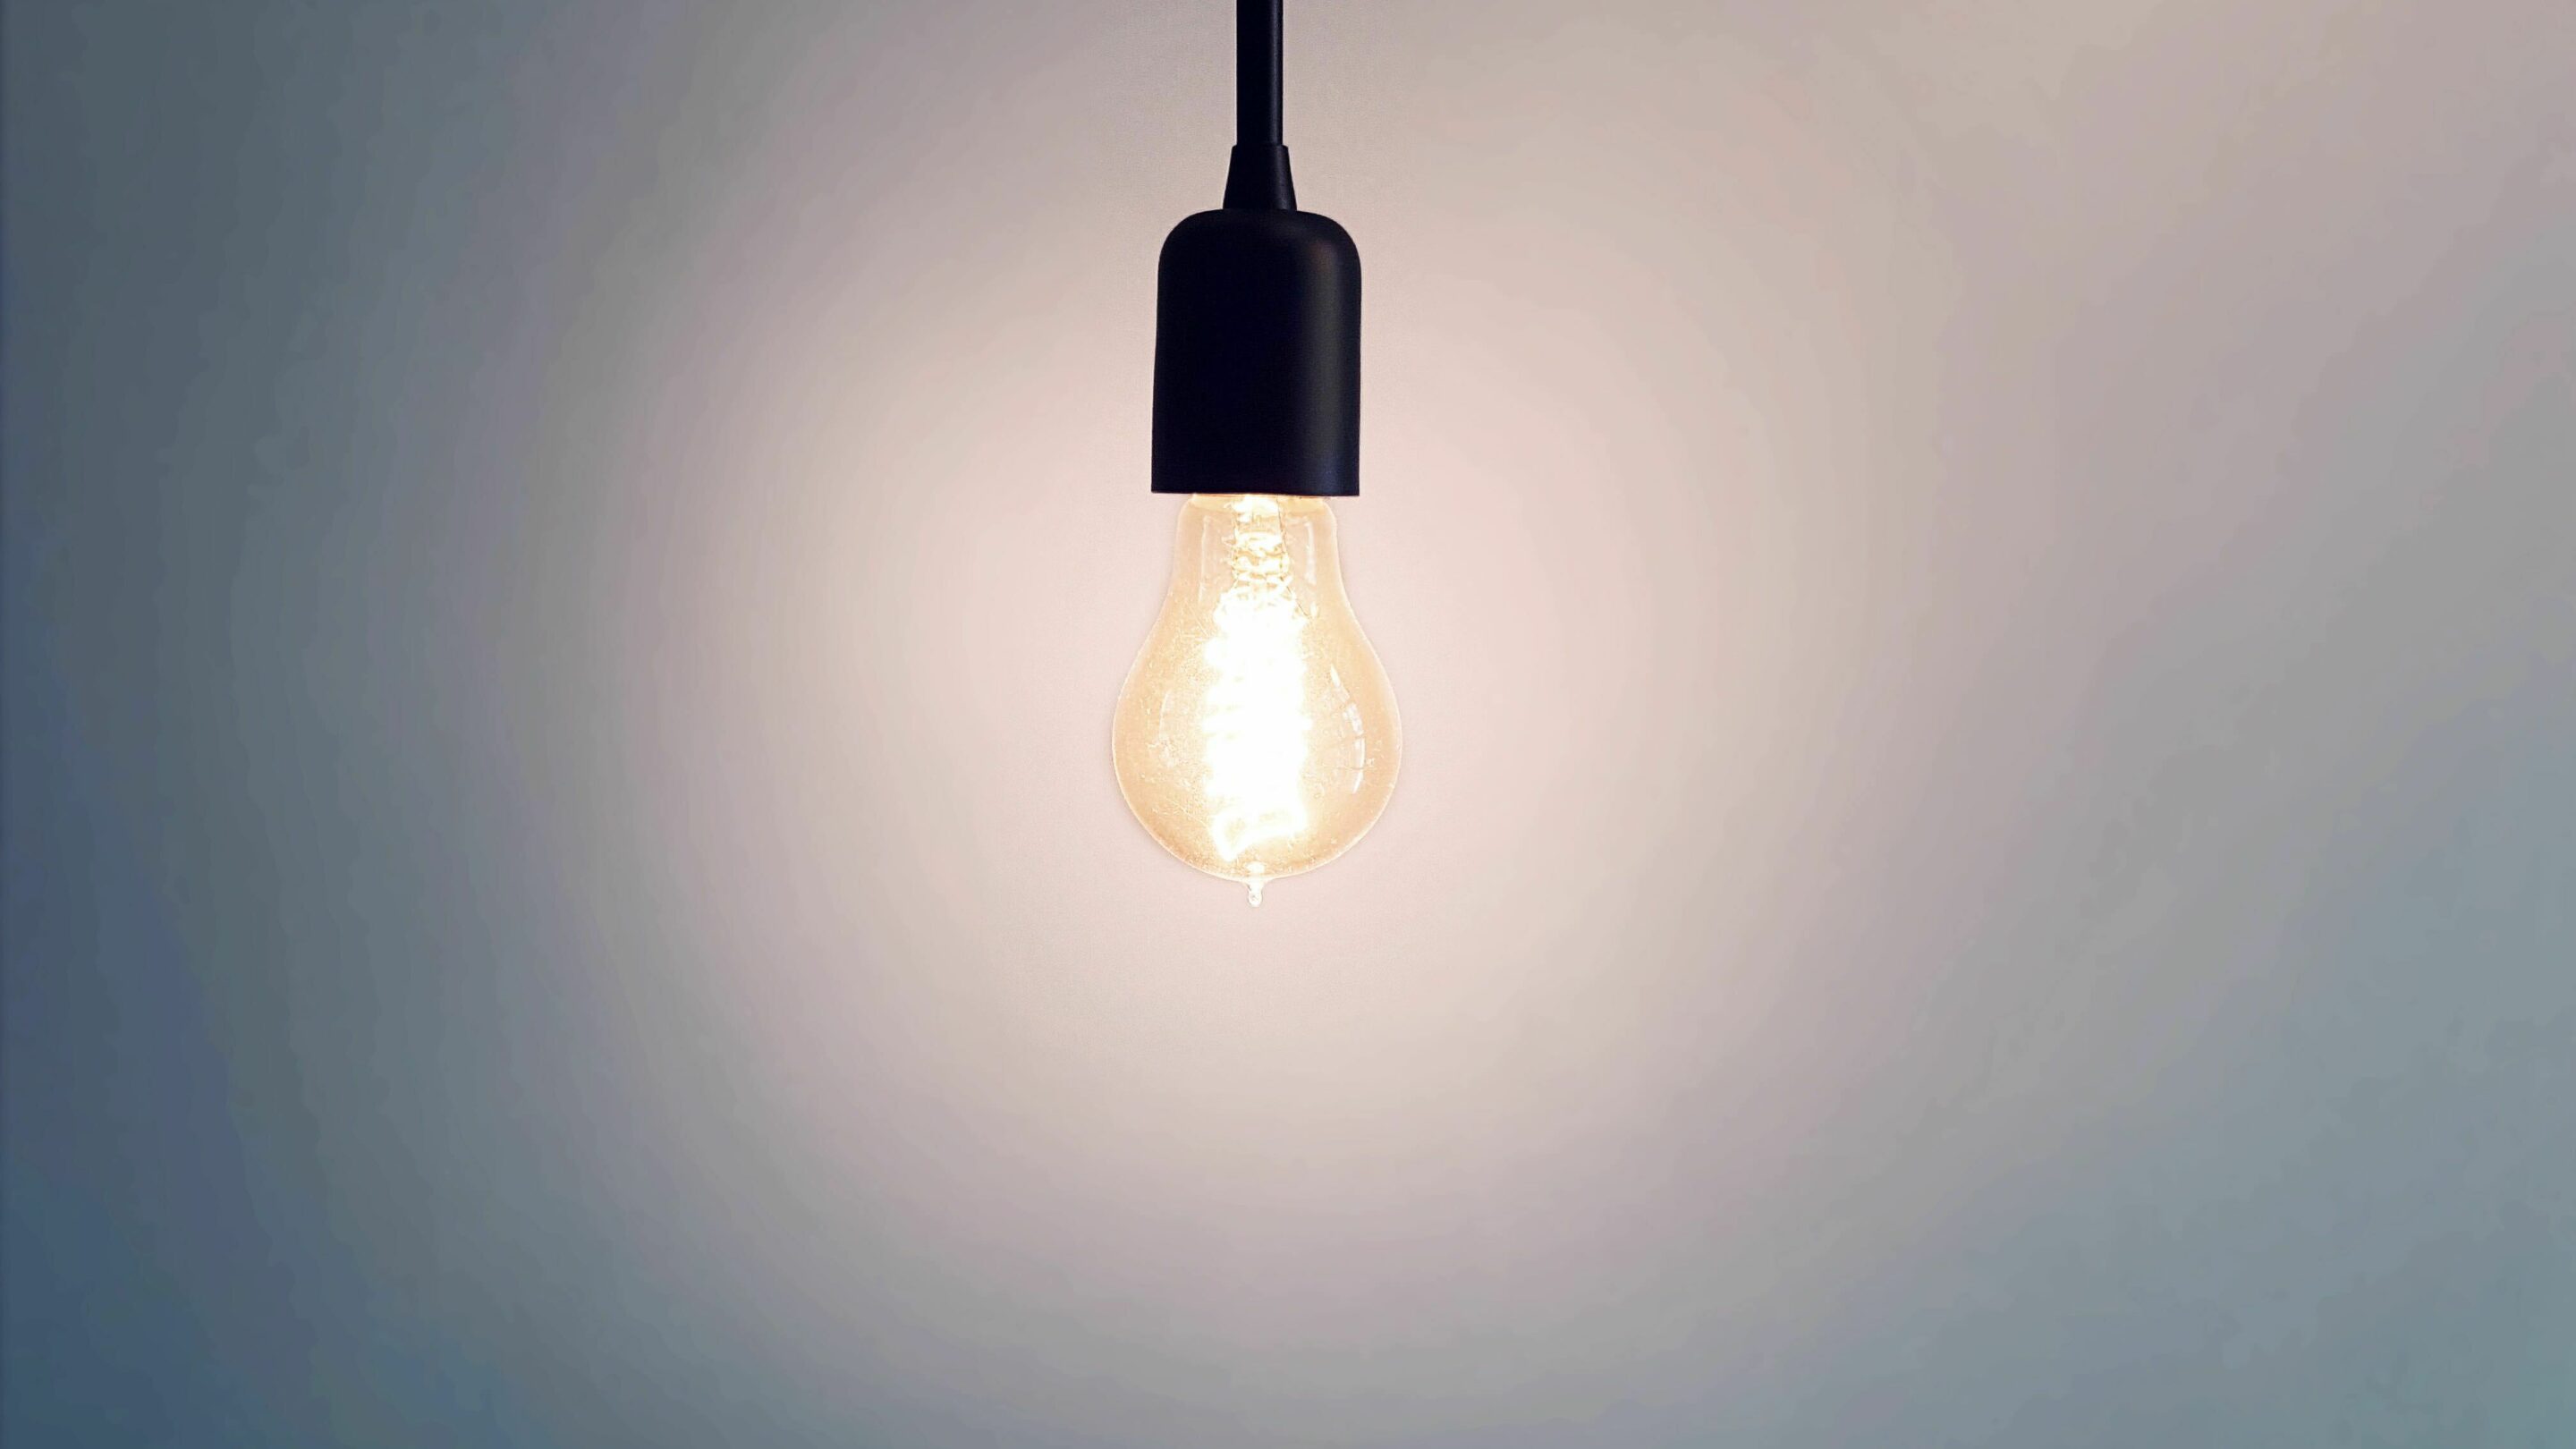 Single lit light bulb hanging from the top of the image.